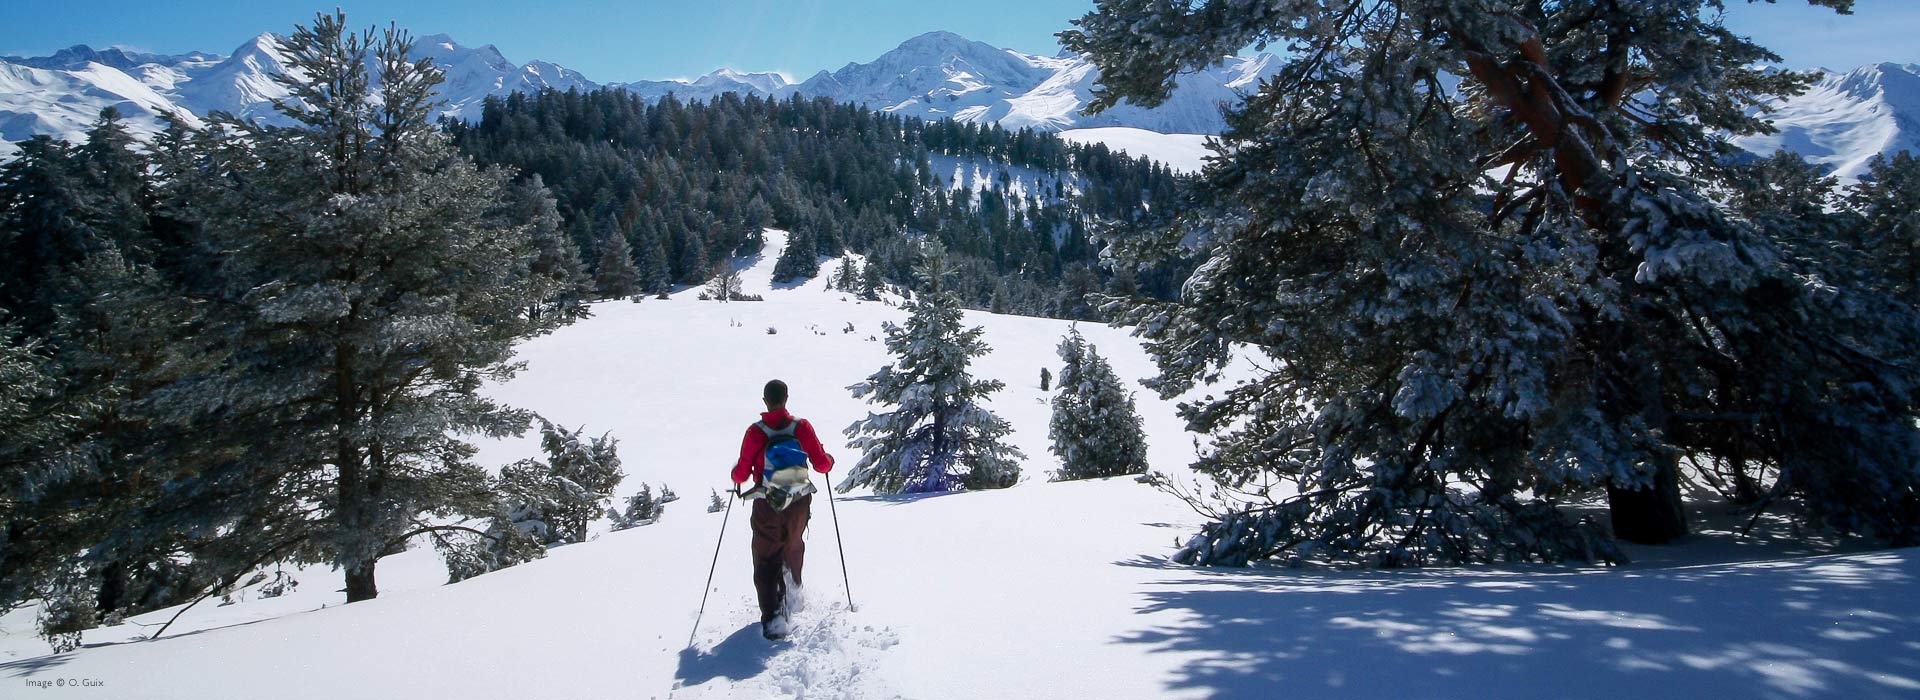 Snowshoe in the French Pyrenees Image ©O. Guix